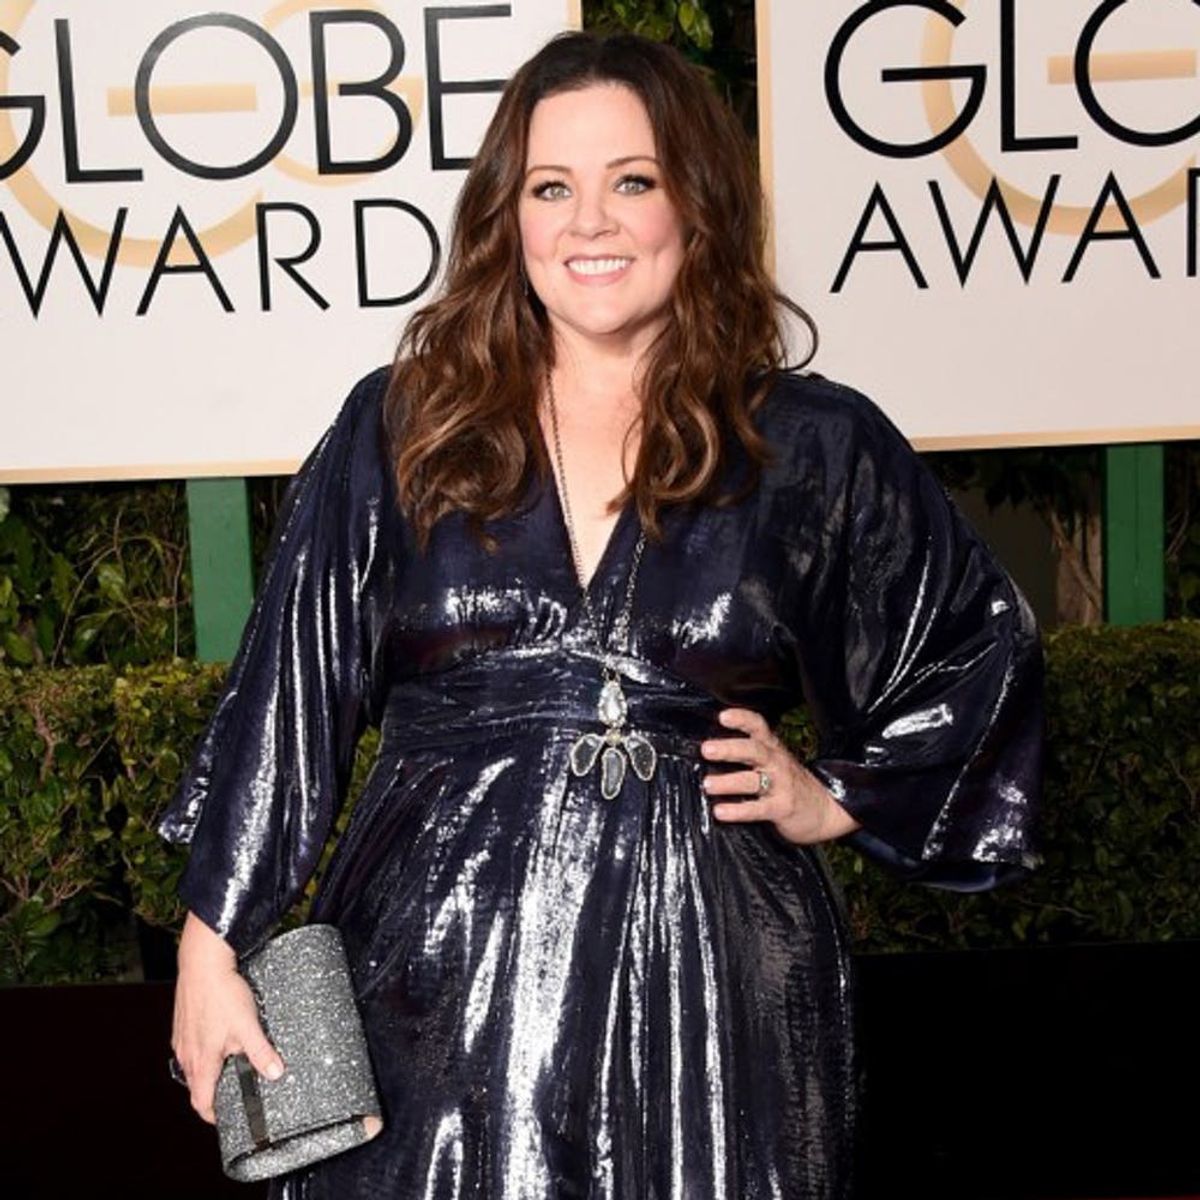 Melissa McCarthy Rocks Her Own Design to the Golden Globes